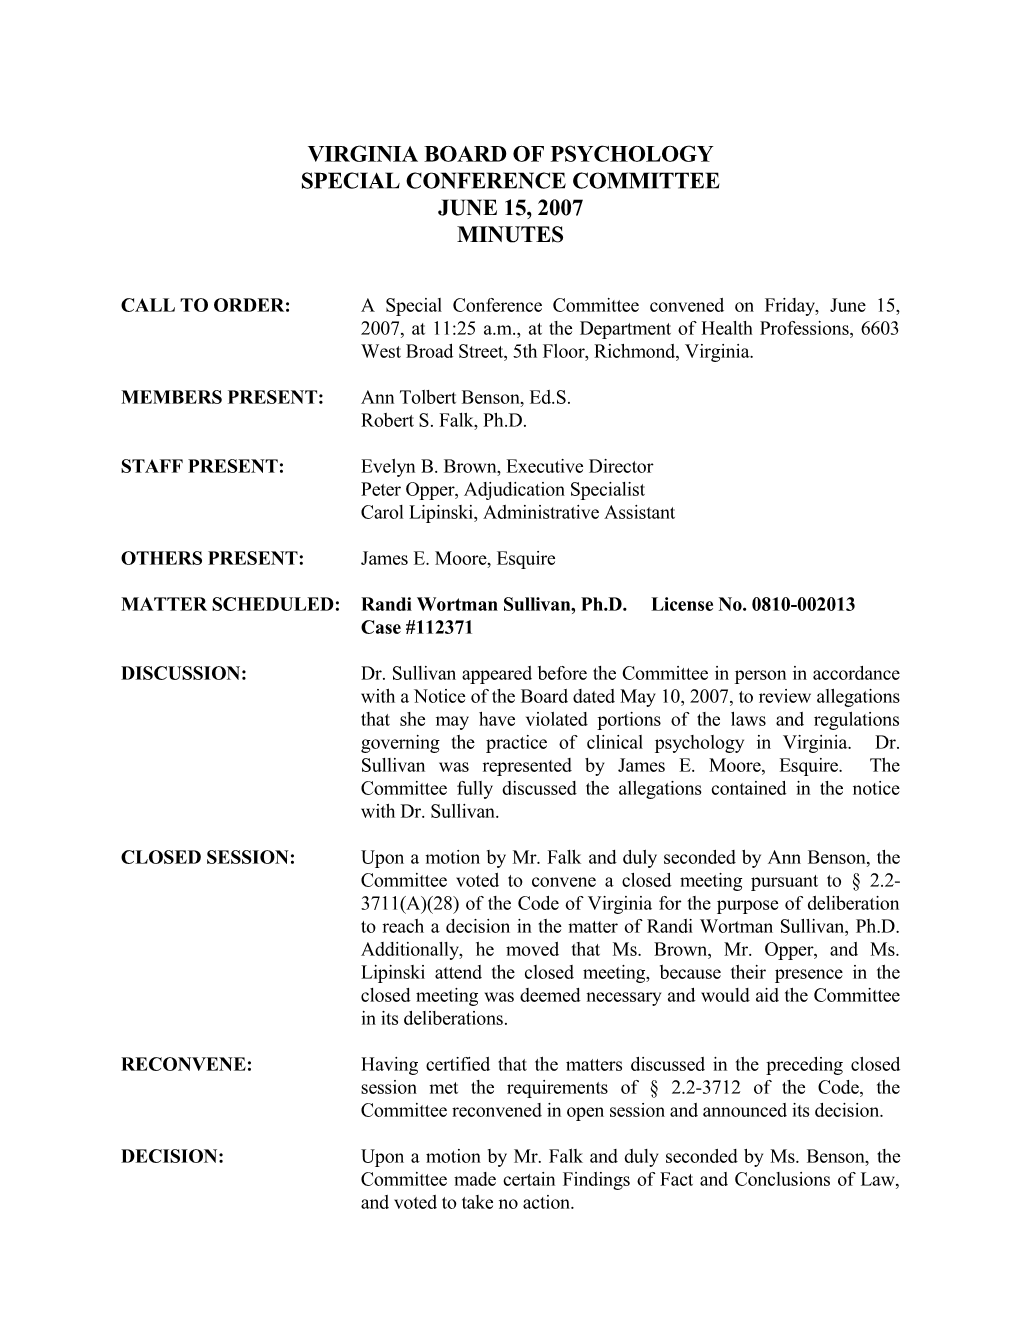 Psychology - Approved Minutes of June 15, 2007, Special Conference Committee